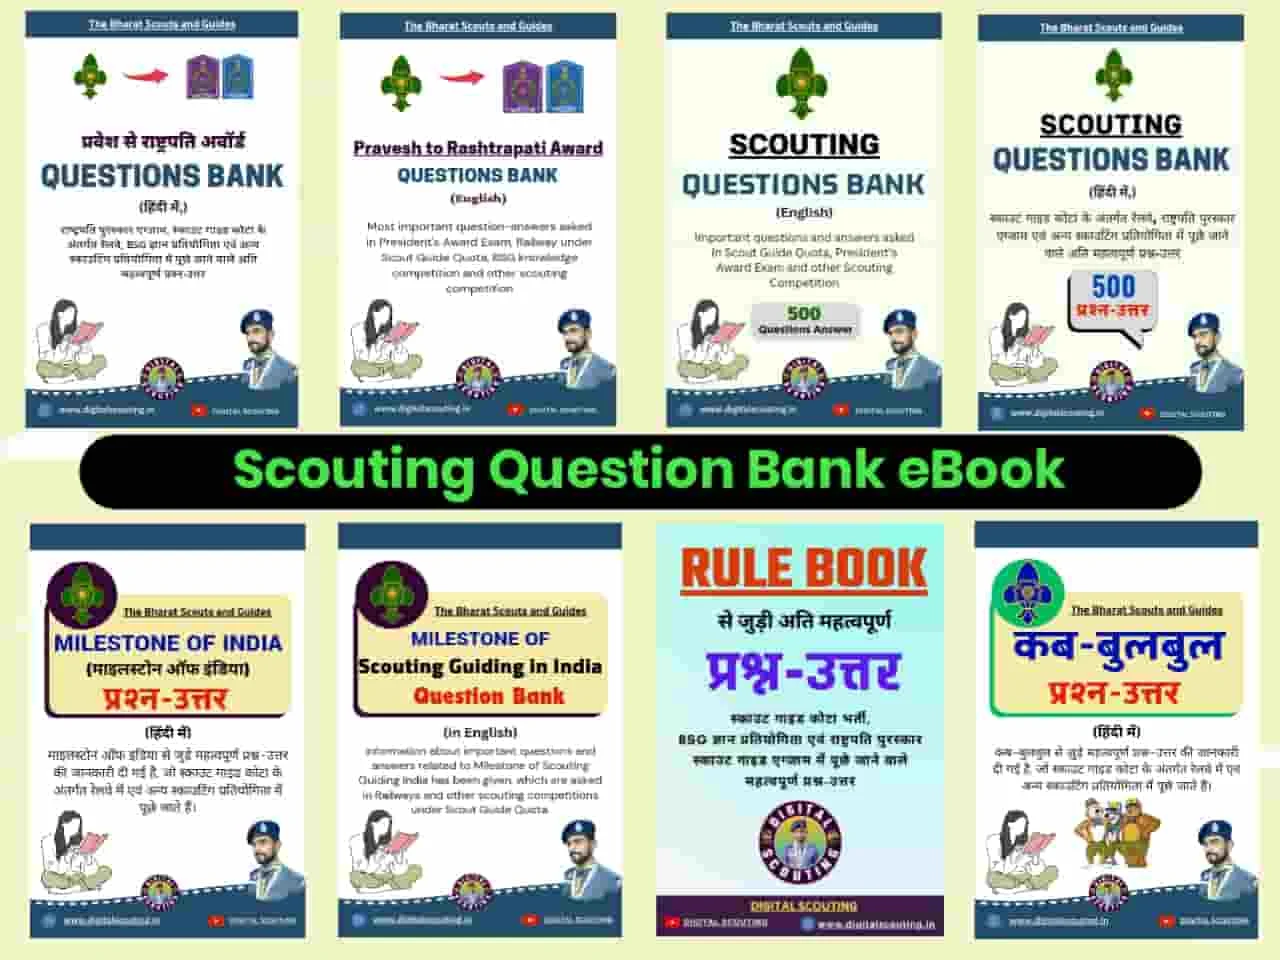 Scouting-question-bank